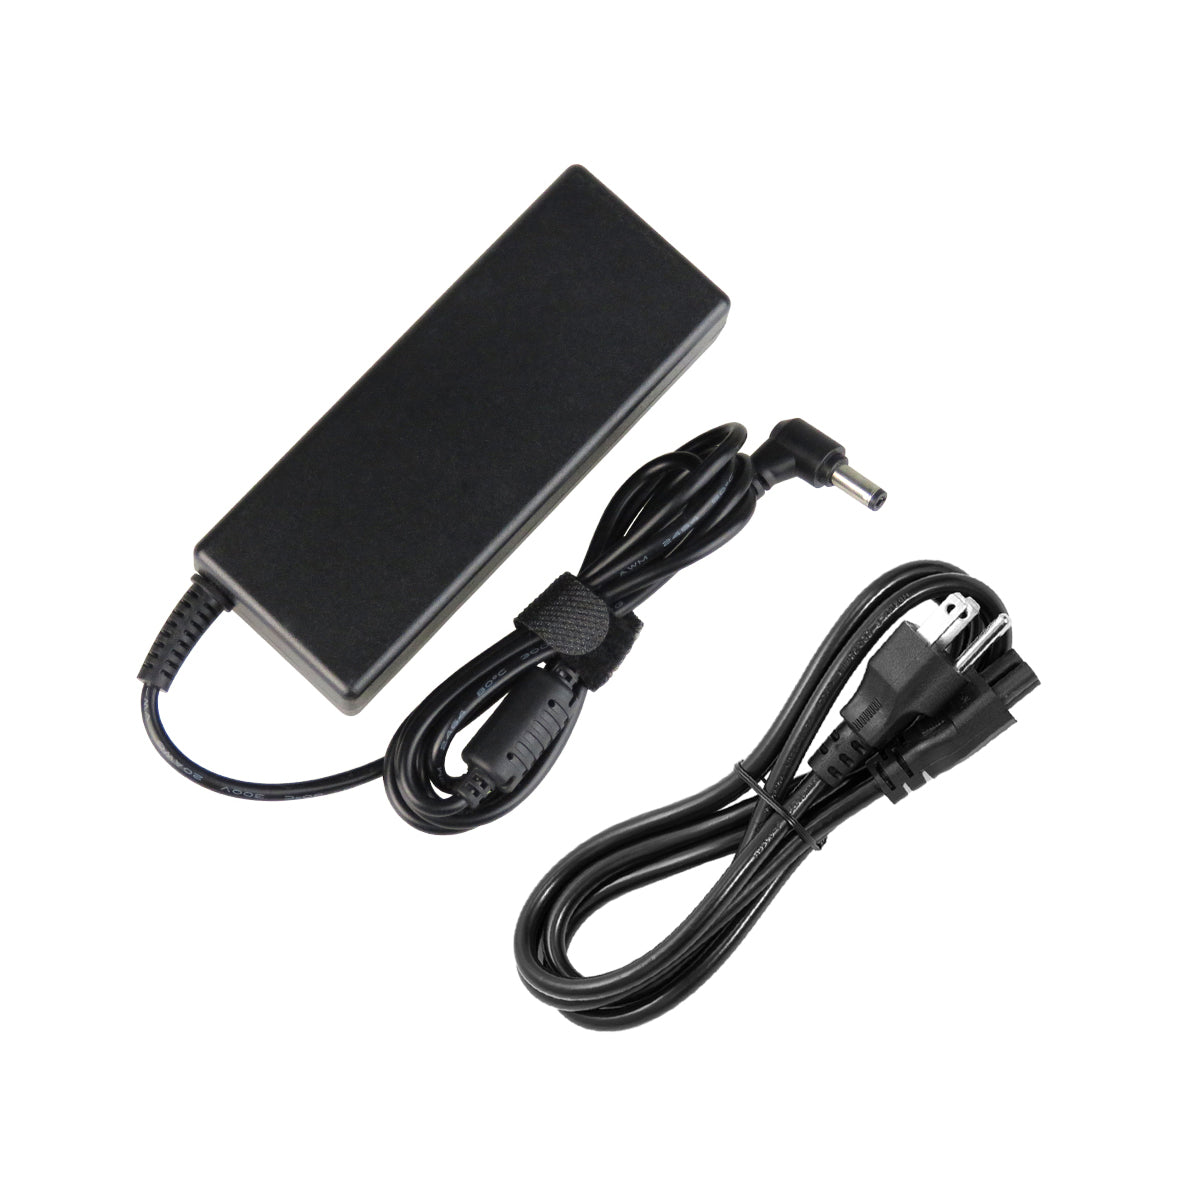 AC Adapter Charger for ASUS ul80vt Series Notebook.